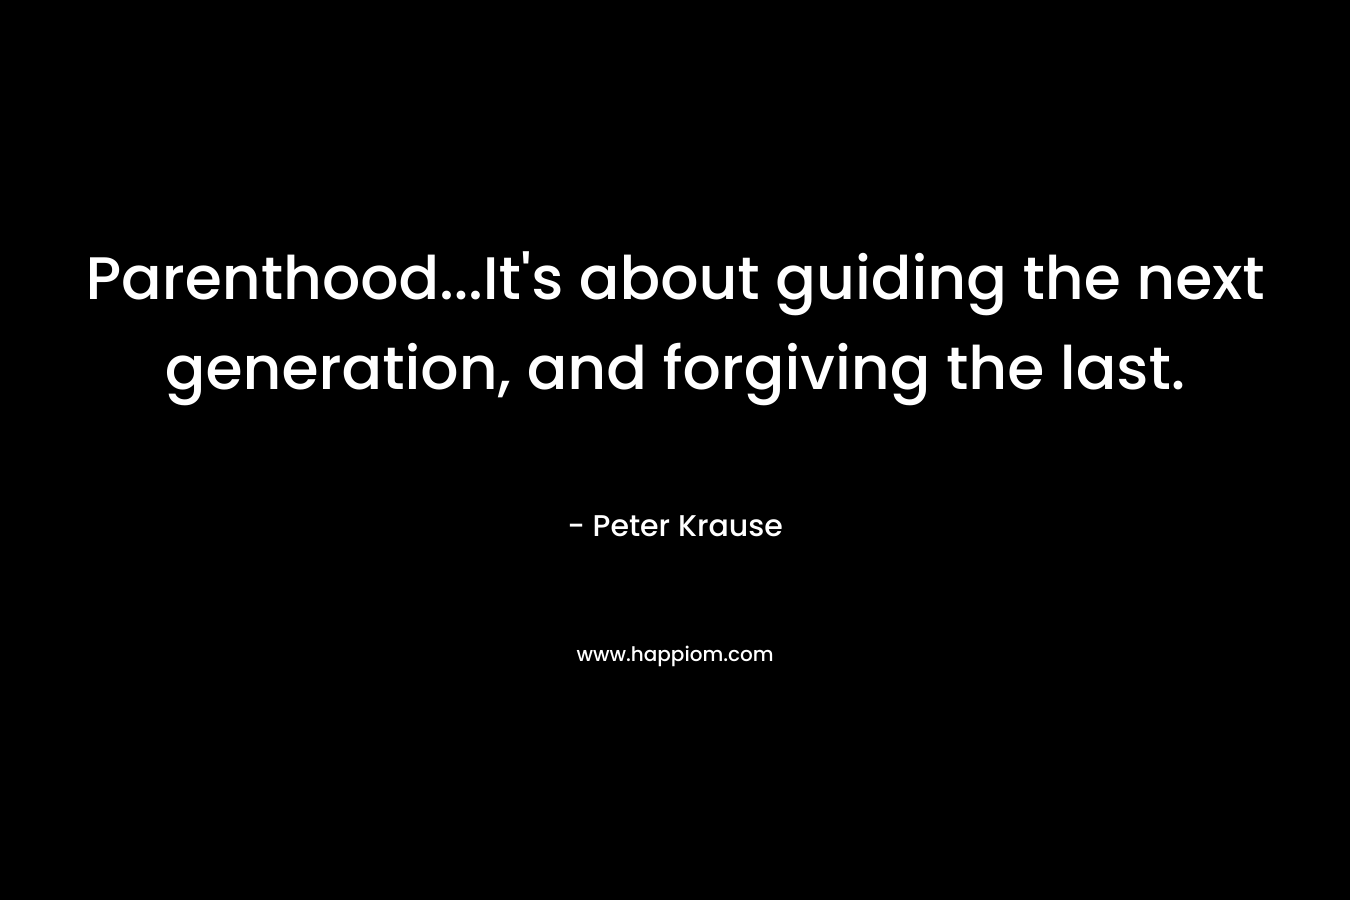 Parenthood…It’s about guiding the next generation, and forgiving the last. – Peter Krause